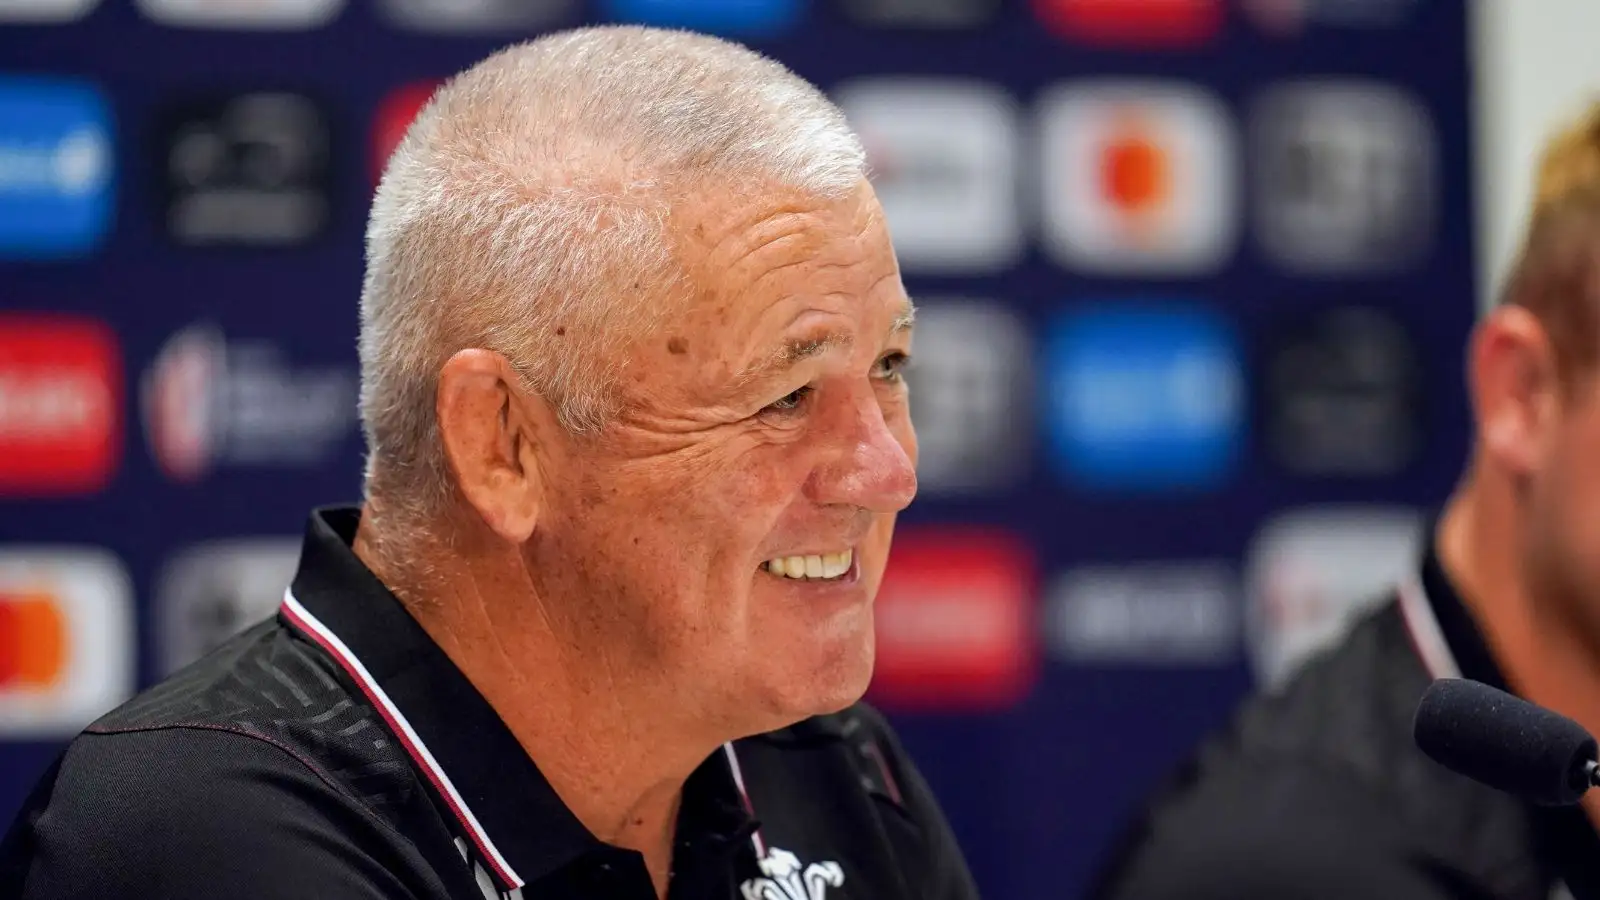 Wales head coach Warren Gatland during a press conference at the Stade de Nice, France.